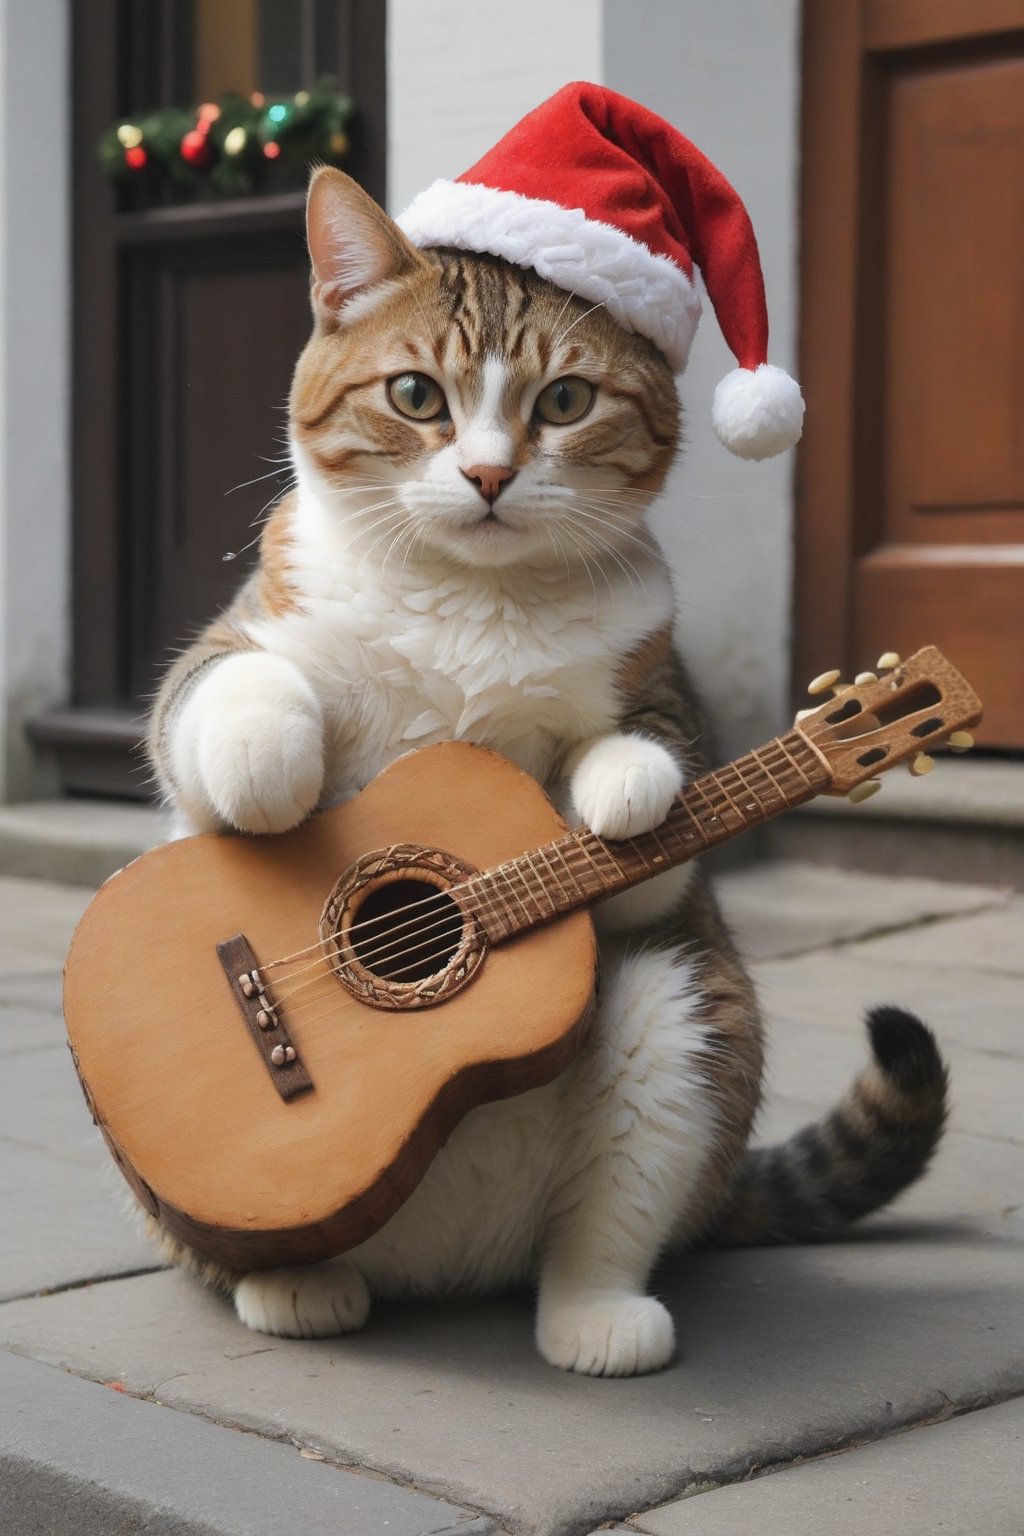 a cool and charismatic cat, donning a festive Christmas hat, BREAK, skillfully strumming a styr guitar while entertaining passersby on a lively street. The cat's playful expression and rhythmic paw movements exude a natural musical talent, captivating the audience with its melodic tunes. The Christmas hat adds a touch of holiday cheer to the scene, as onlookers pause to enjoy the impromptu street performance.